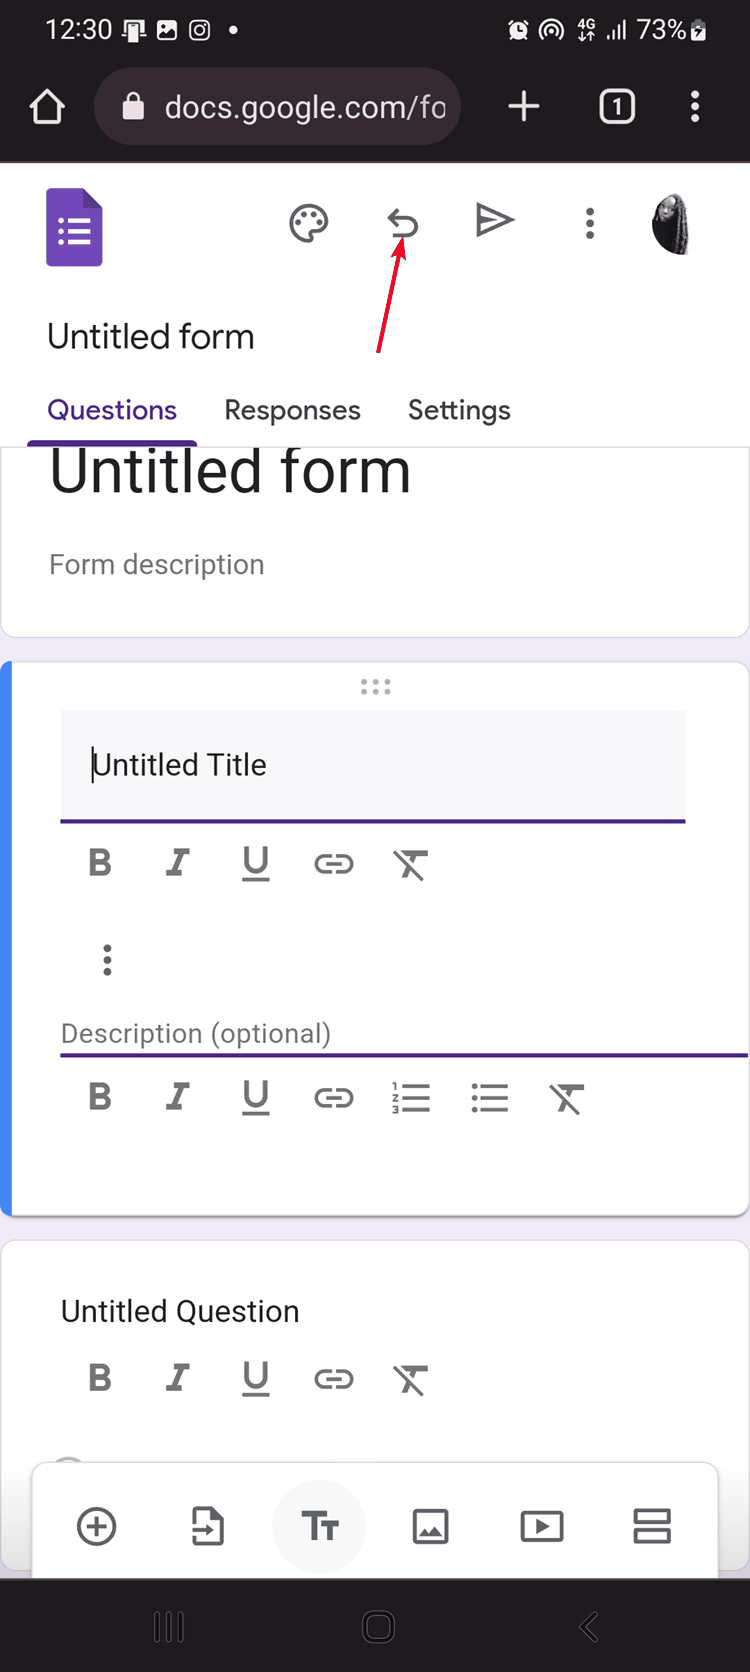 Icon for reverting edits or removing elements on mobile version of Google Forms